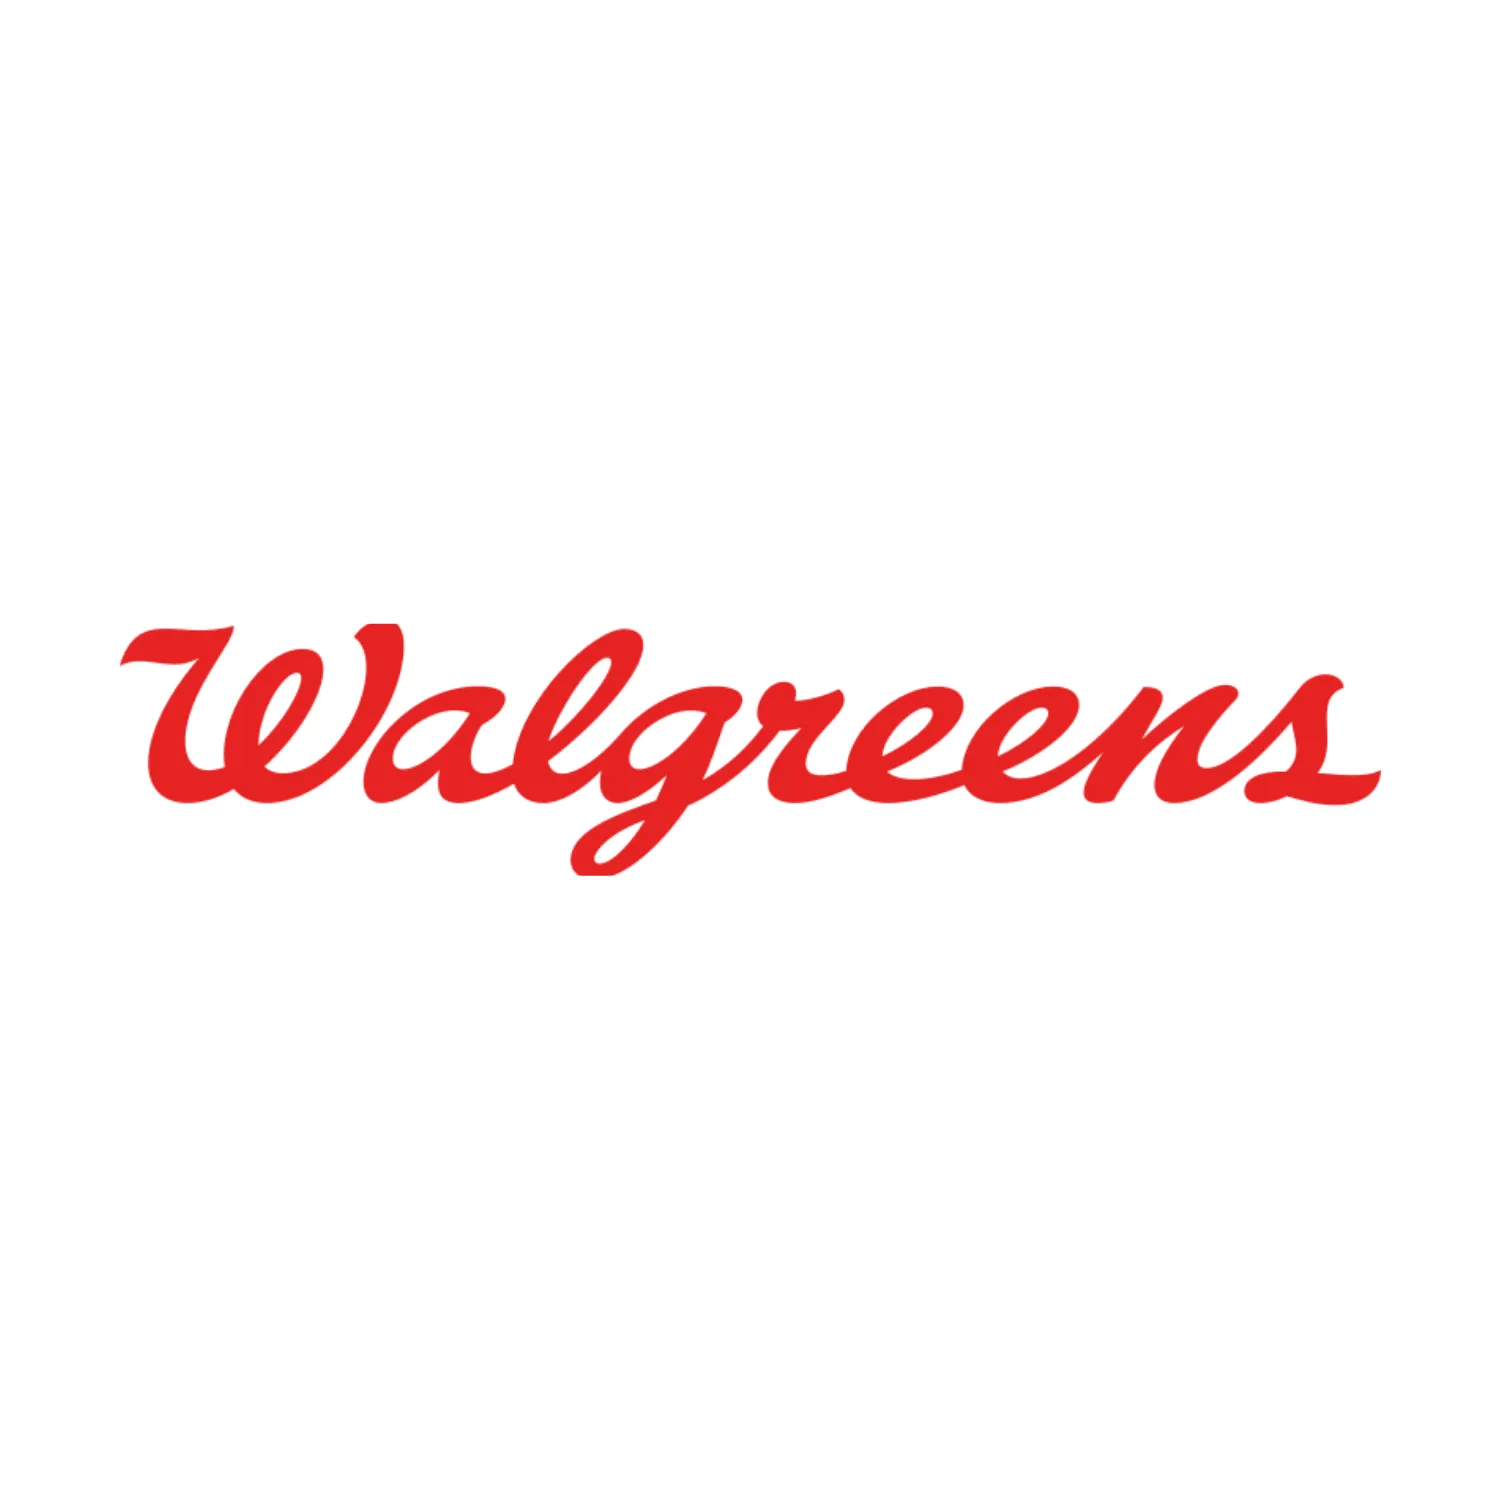 Database of Walgreens Locations in the United States